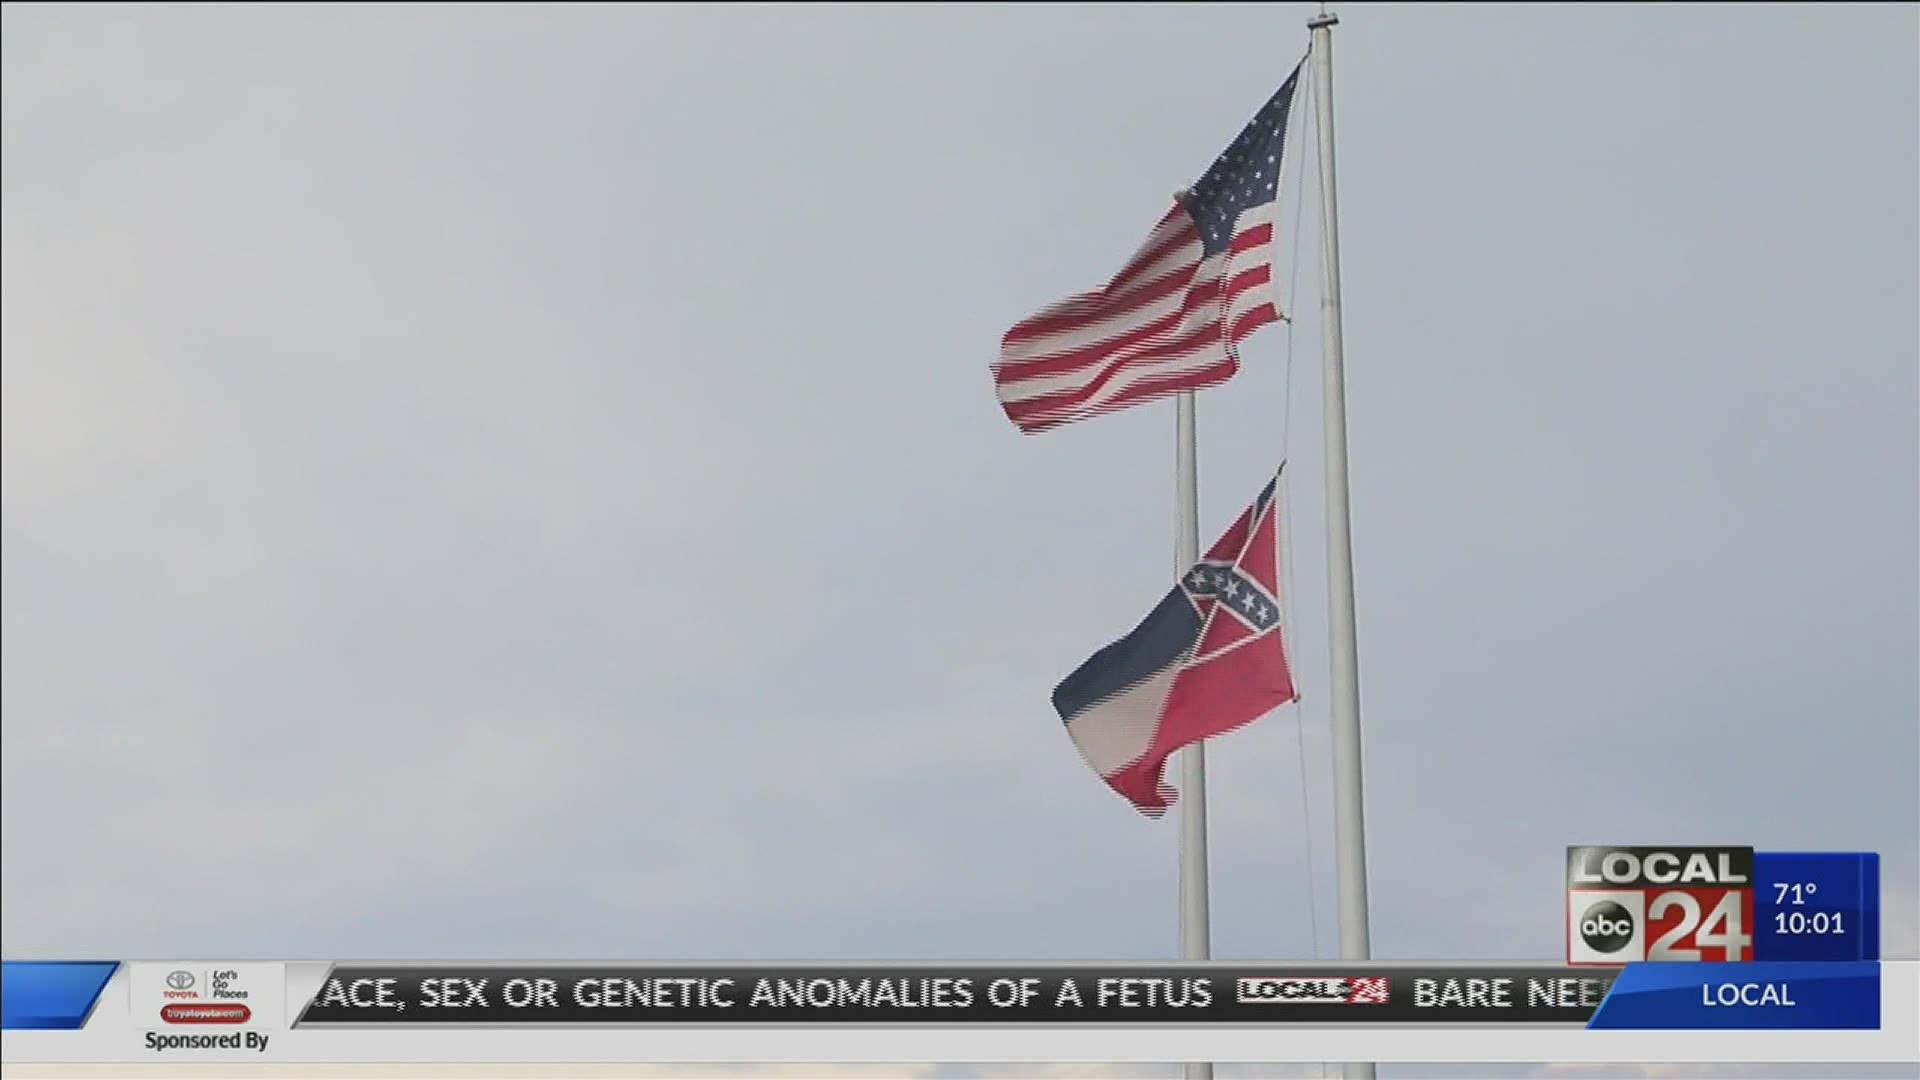 The retailer announced it will no longer sell or display the Mississippi flag in any of its stores or online.